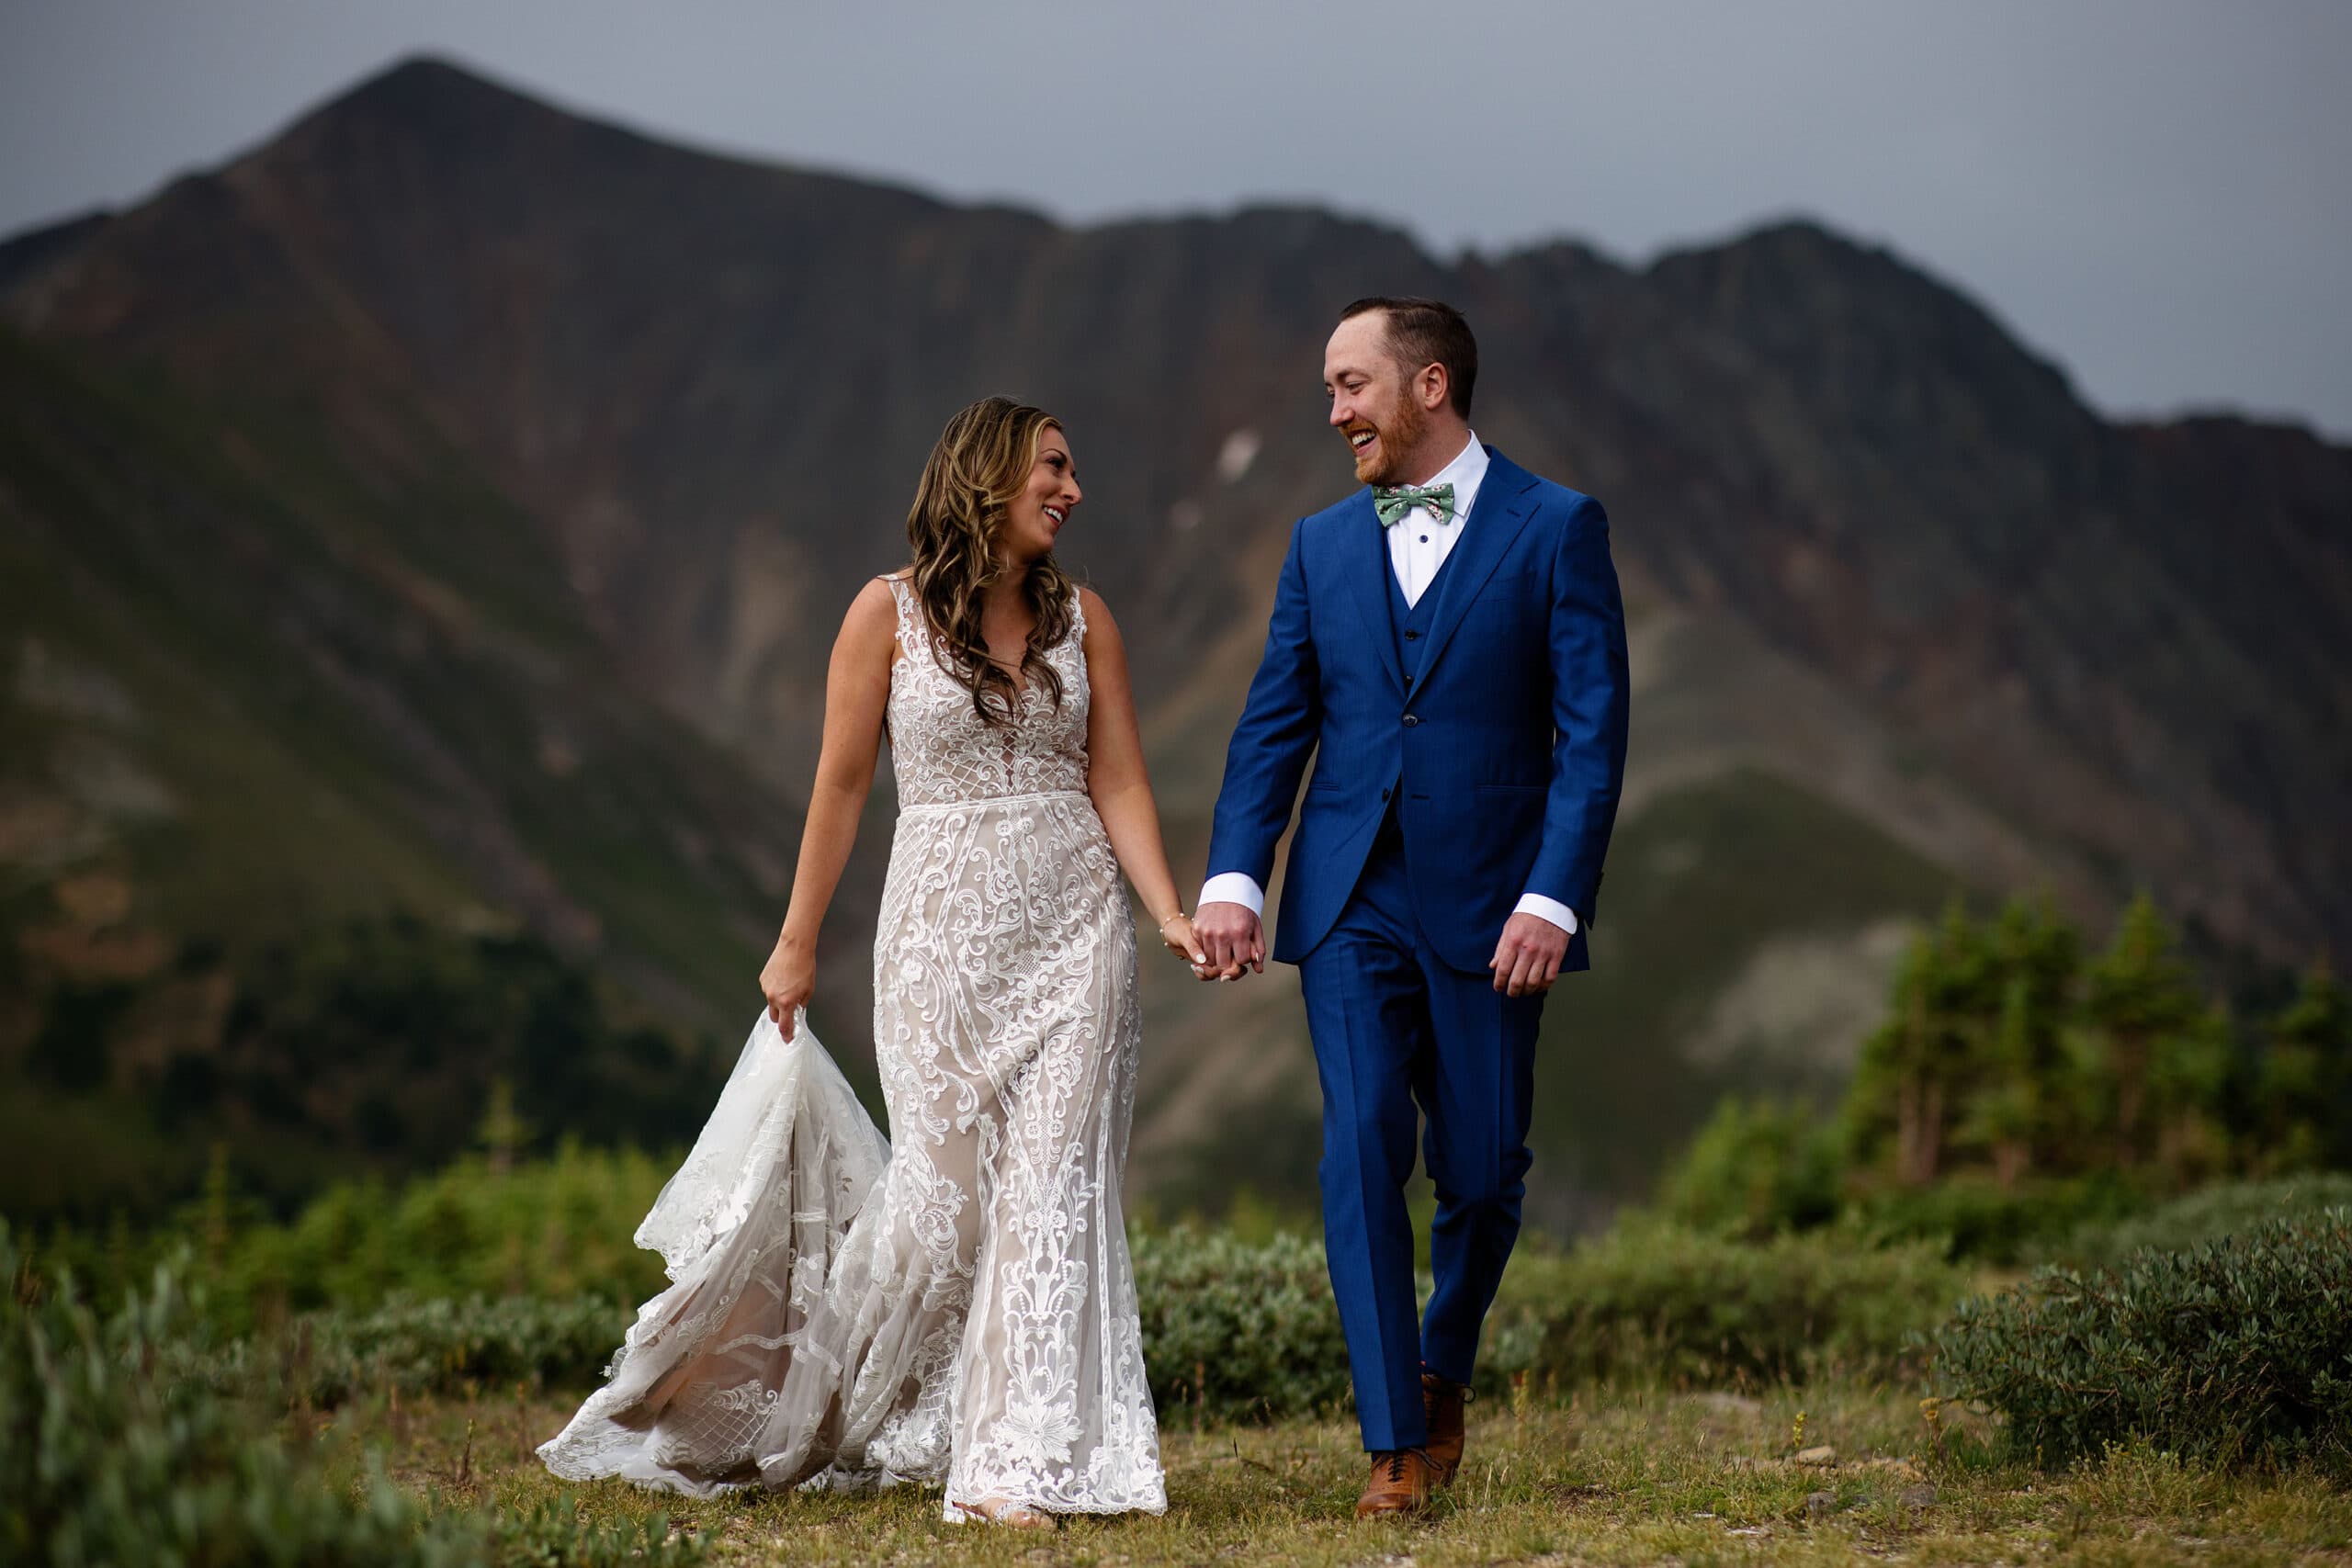 Caitlin and Gavin walk together on Loveland Pass during their wedding day